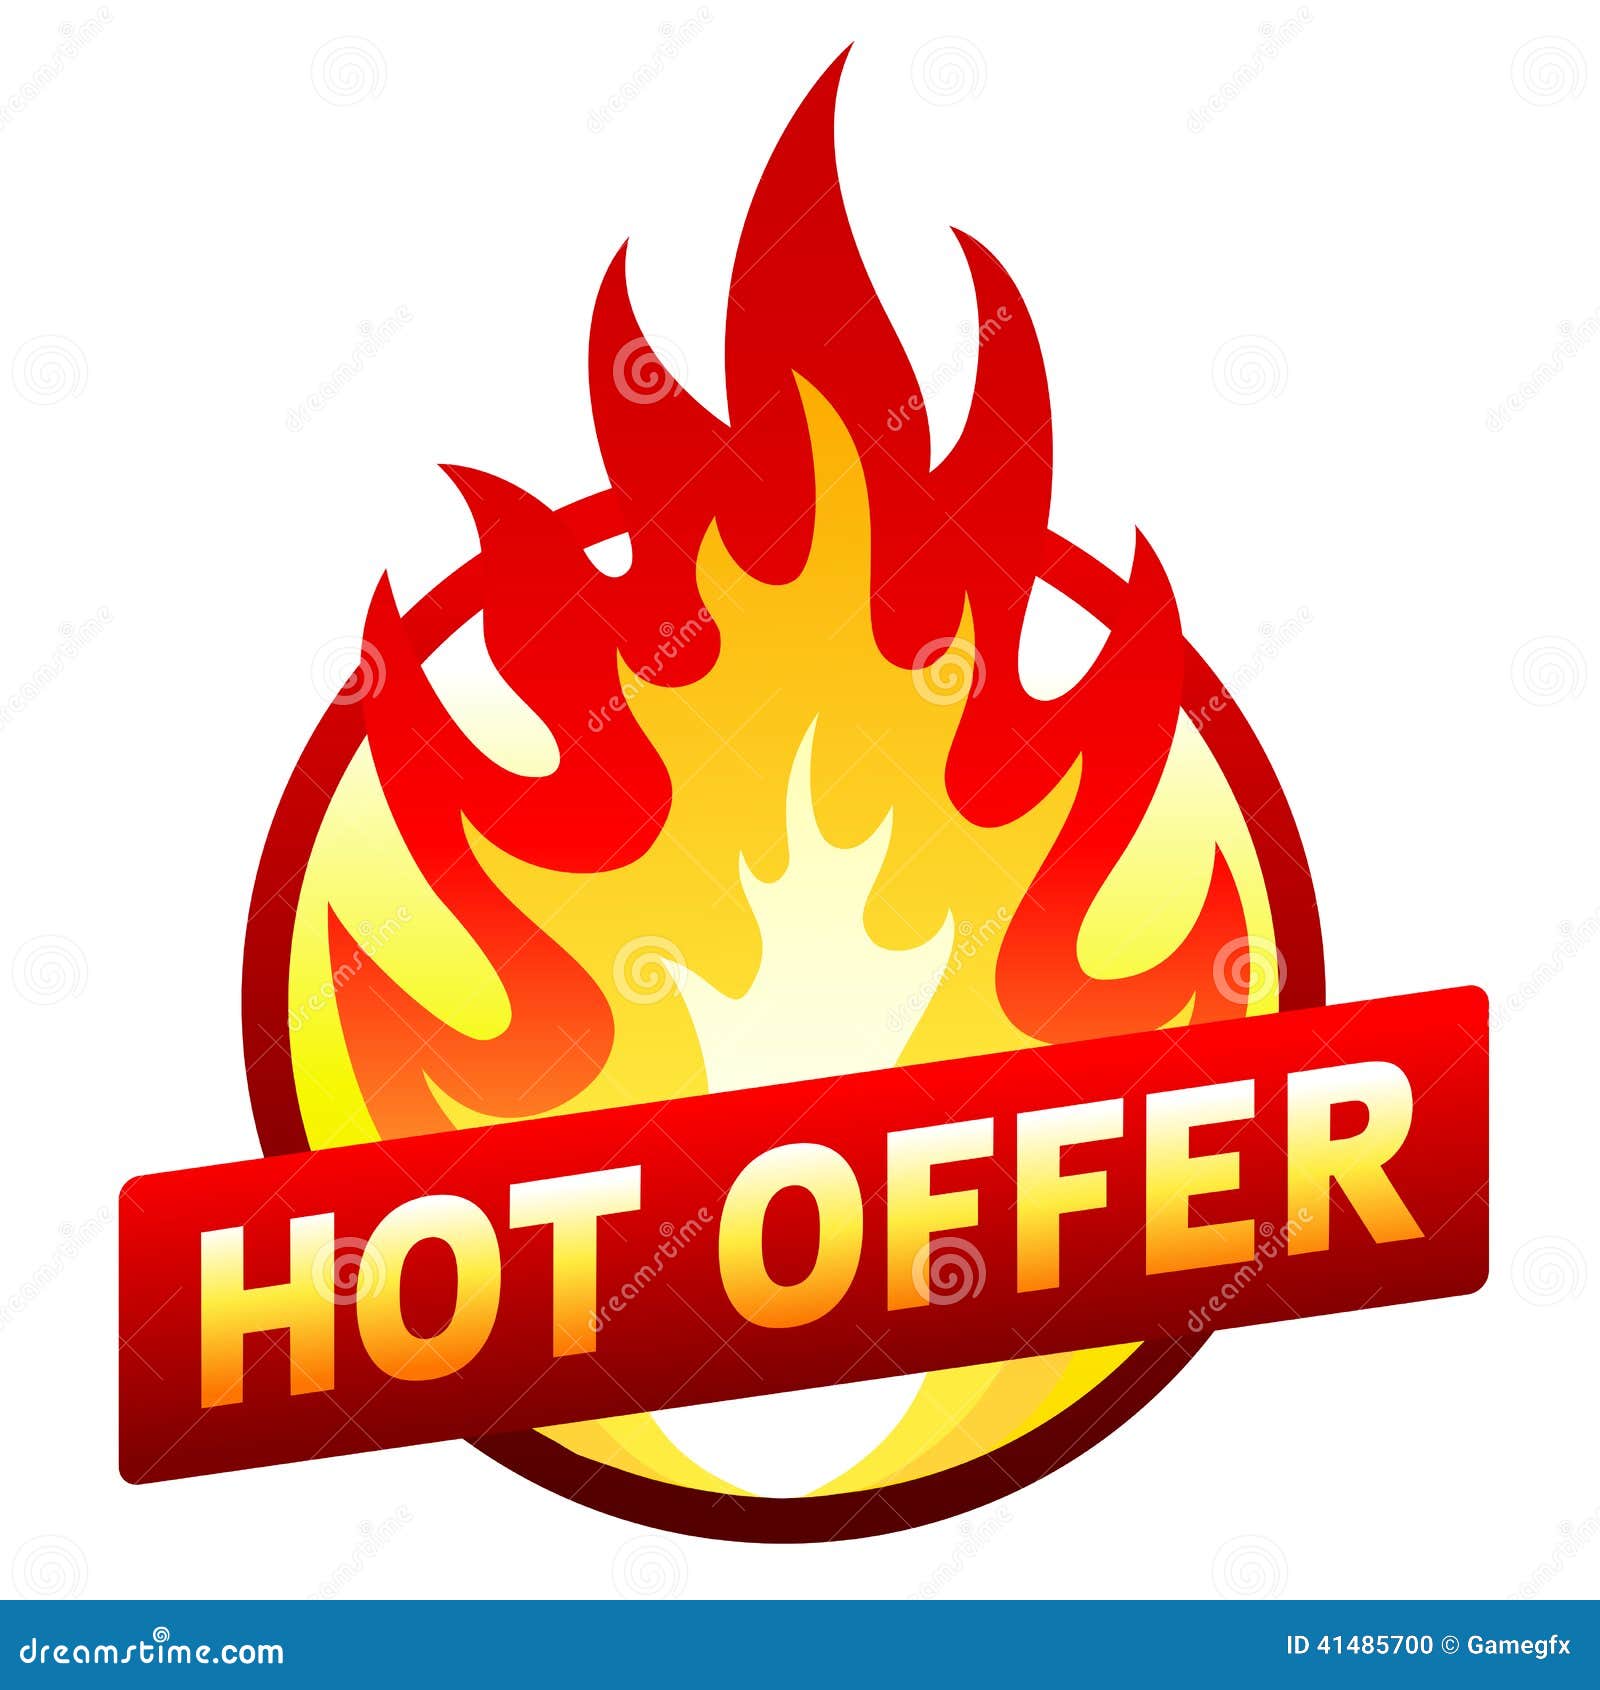 Isolated on white hot offer red price sticker badge with flame